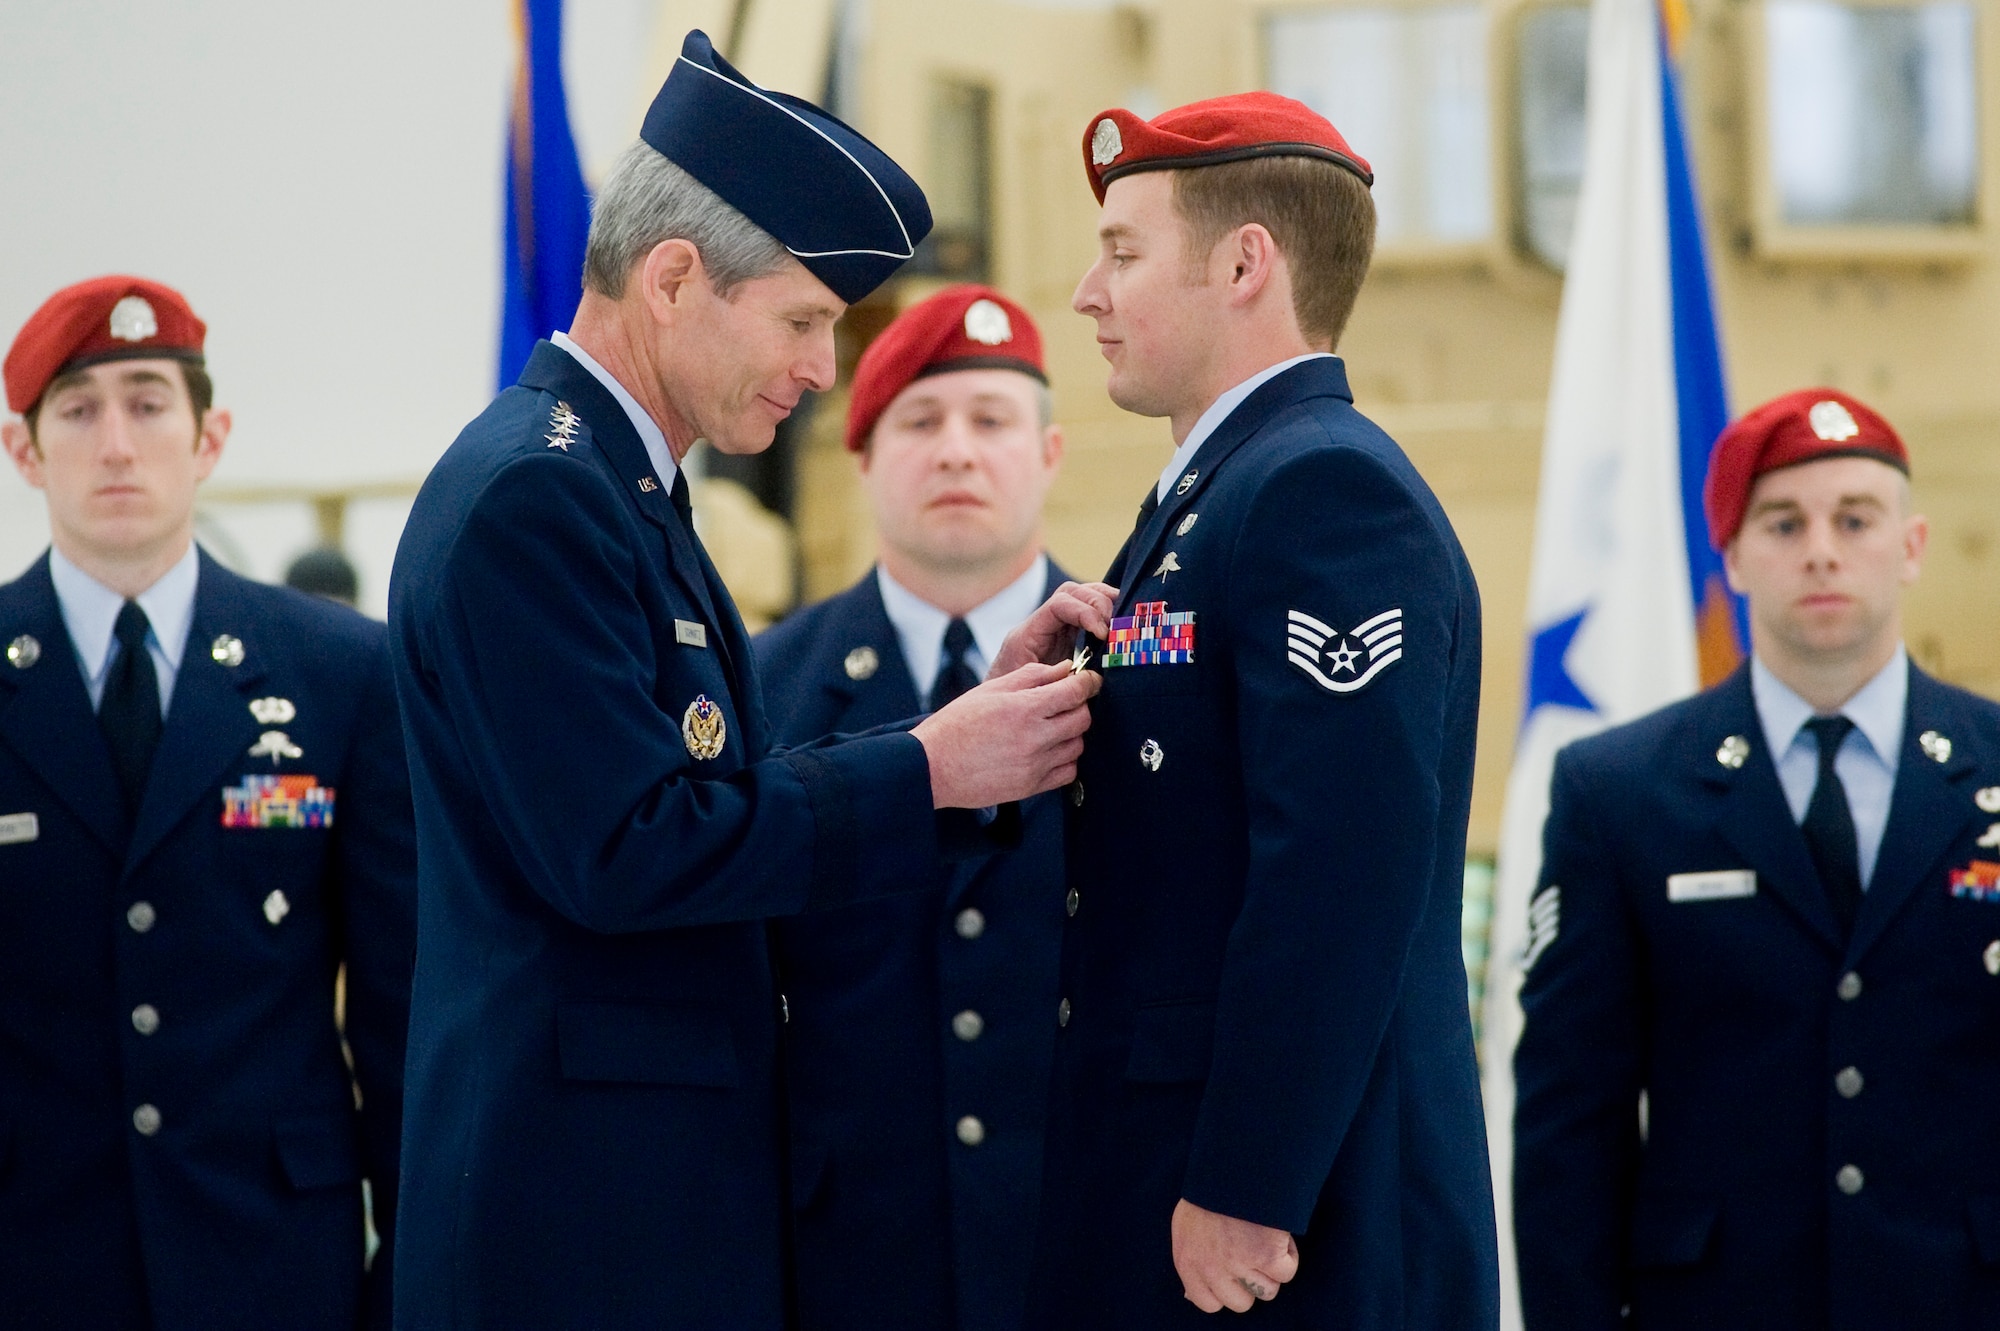 Chief of Staff of the Air Force Gen. Norton A. Schwartz pins the Silver Star on Staff Sgt. Sean Harvell during a medal ceremony at Joint Base Lewis-McChord, Wash., April 29.  Two Silver Stars, the nation's third highest decoration for valor, were presented first to Sergeant Harvell for his actions during multiple firefights with enemy forces in Afghanistan during spring and summer 2007.  (U.S. Air Force photo/Abner Guzman)
